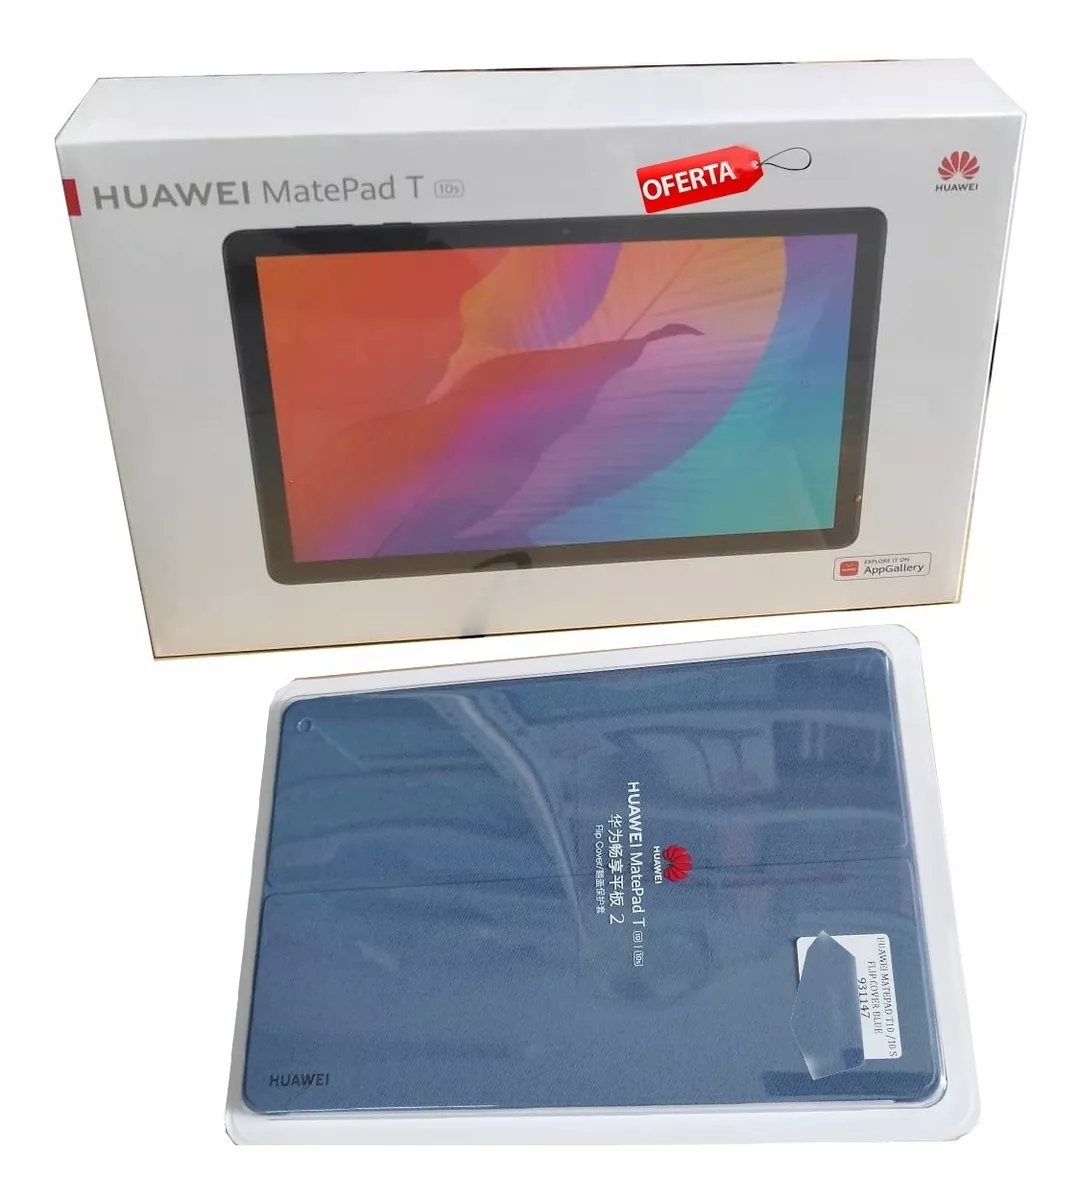 Tablet Huawei Matepad T 10s + Cover Blue Ags3-w09 2gb/32gb